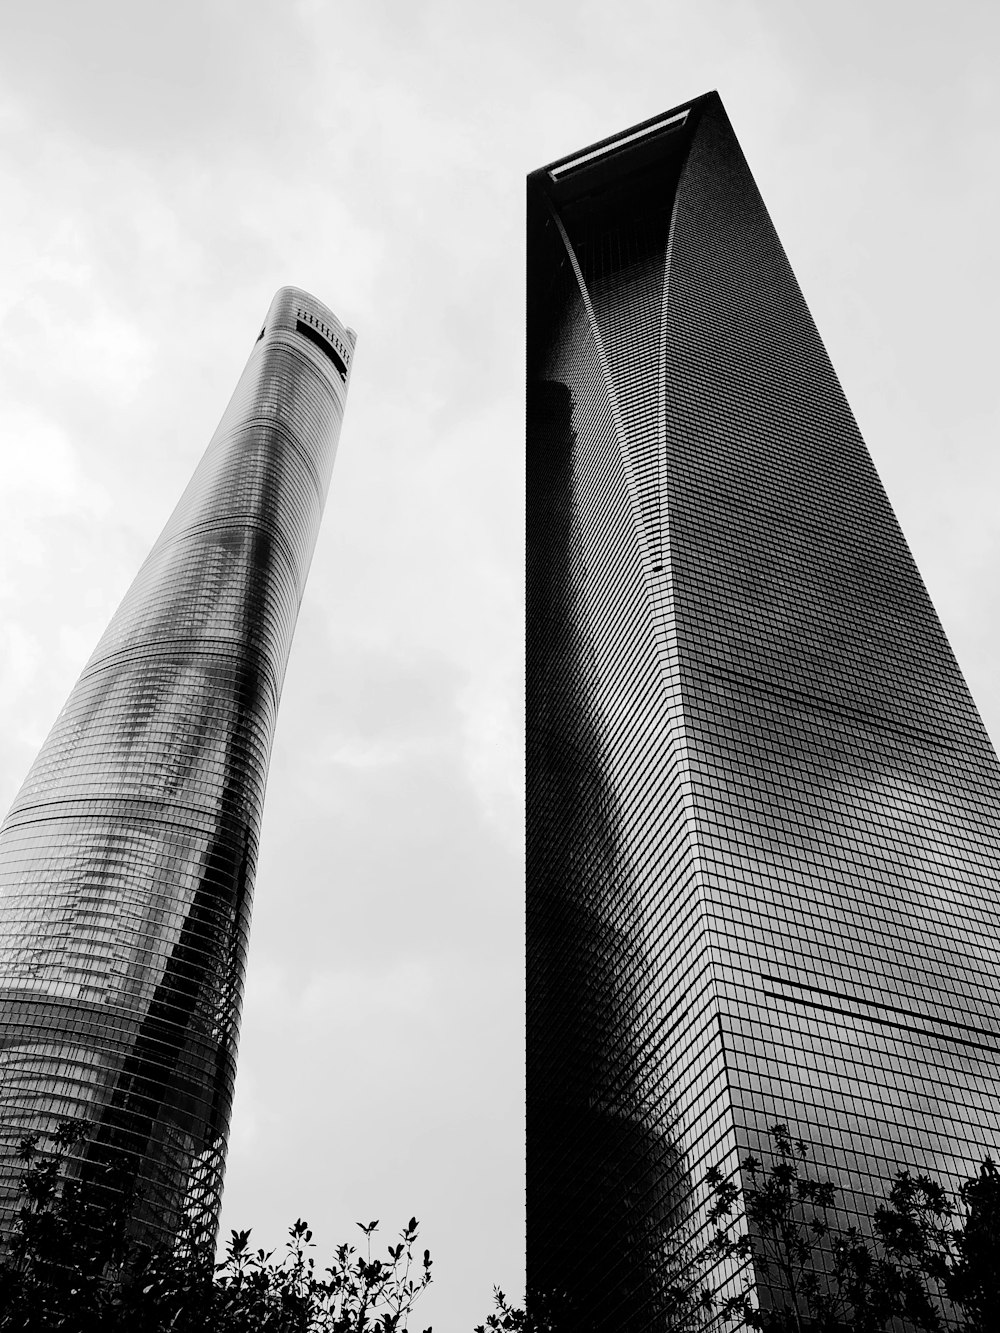 low-angle photography of two high-rise glass buildings